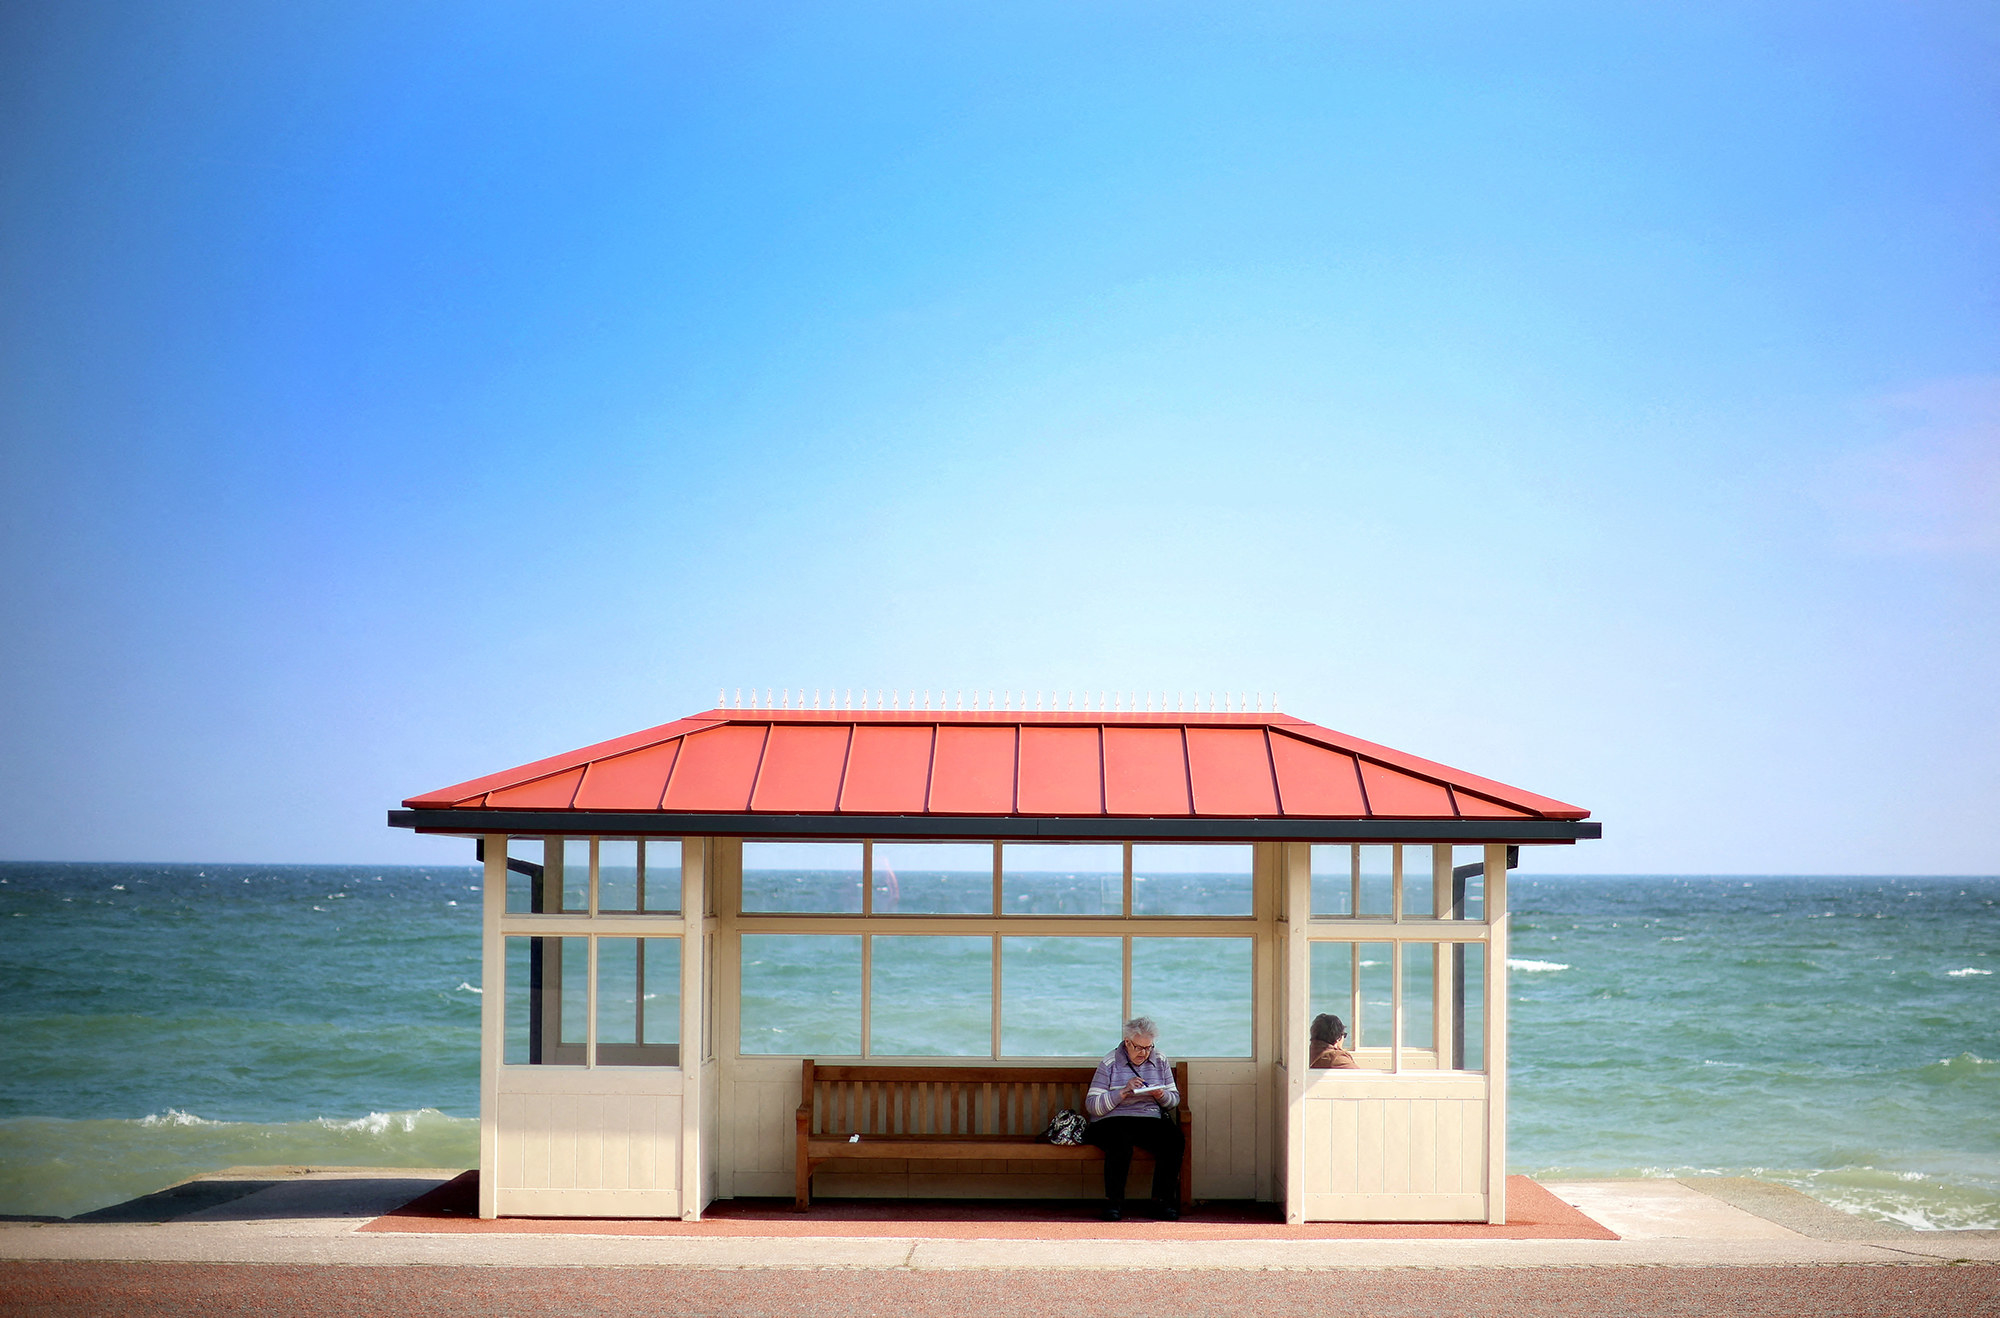 a woman sits on a bench inside a window-filled open shelter in front of the seashore